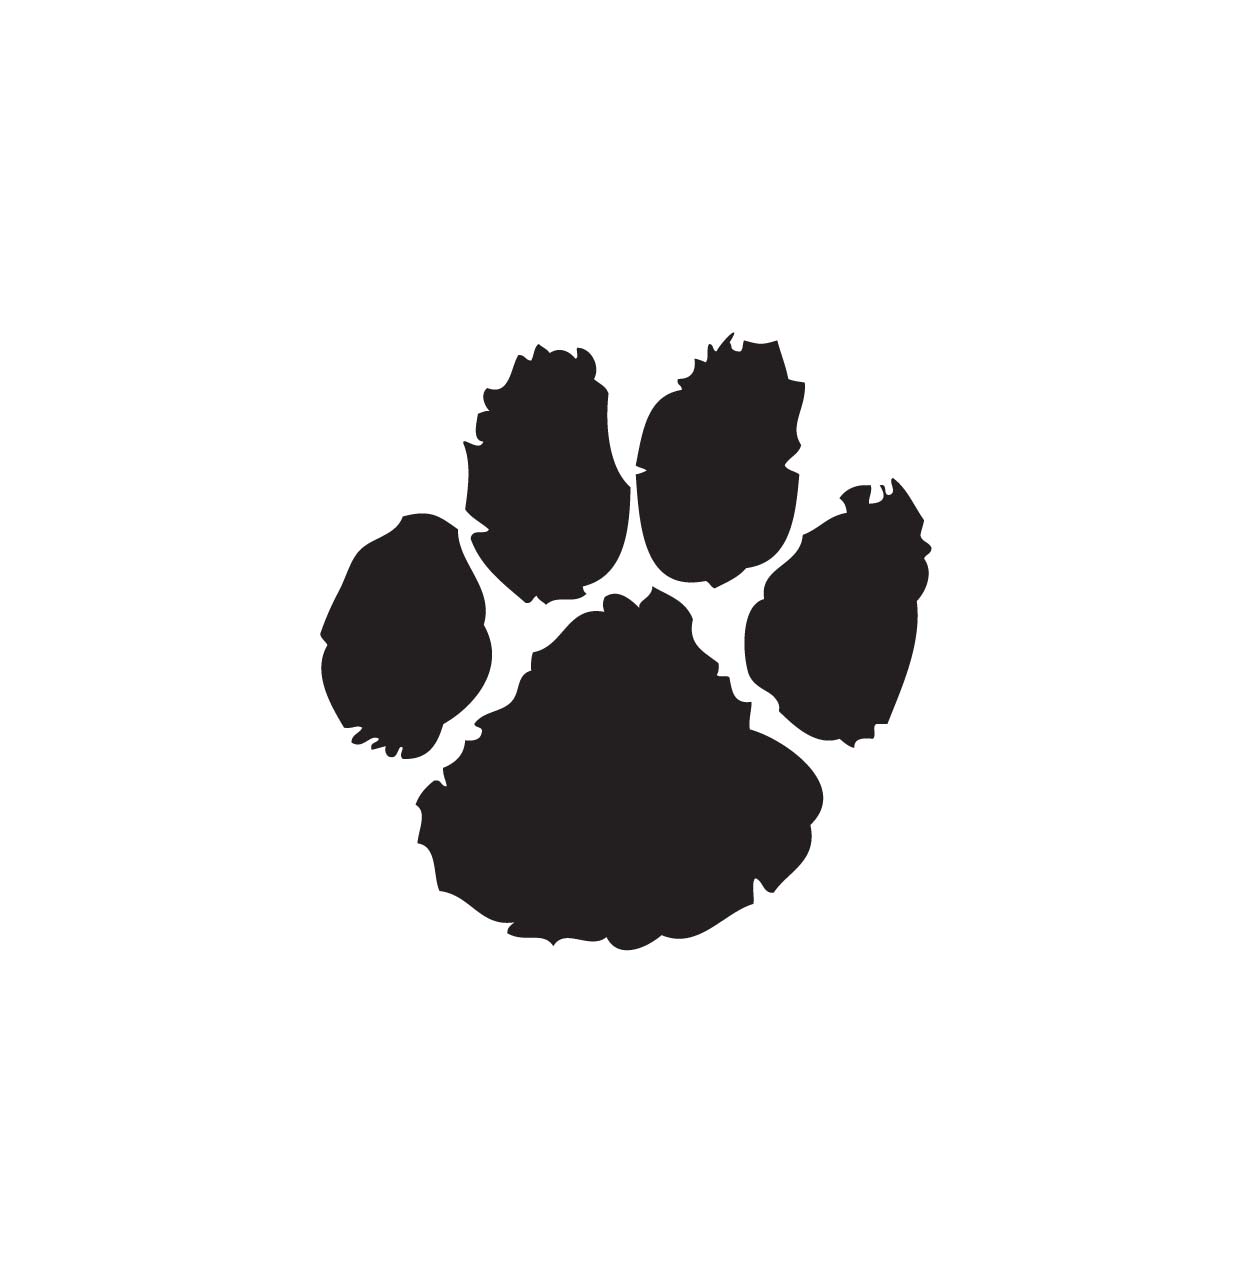 Paw Print Clipart Image: A ..